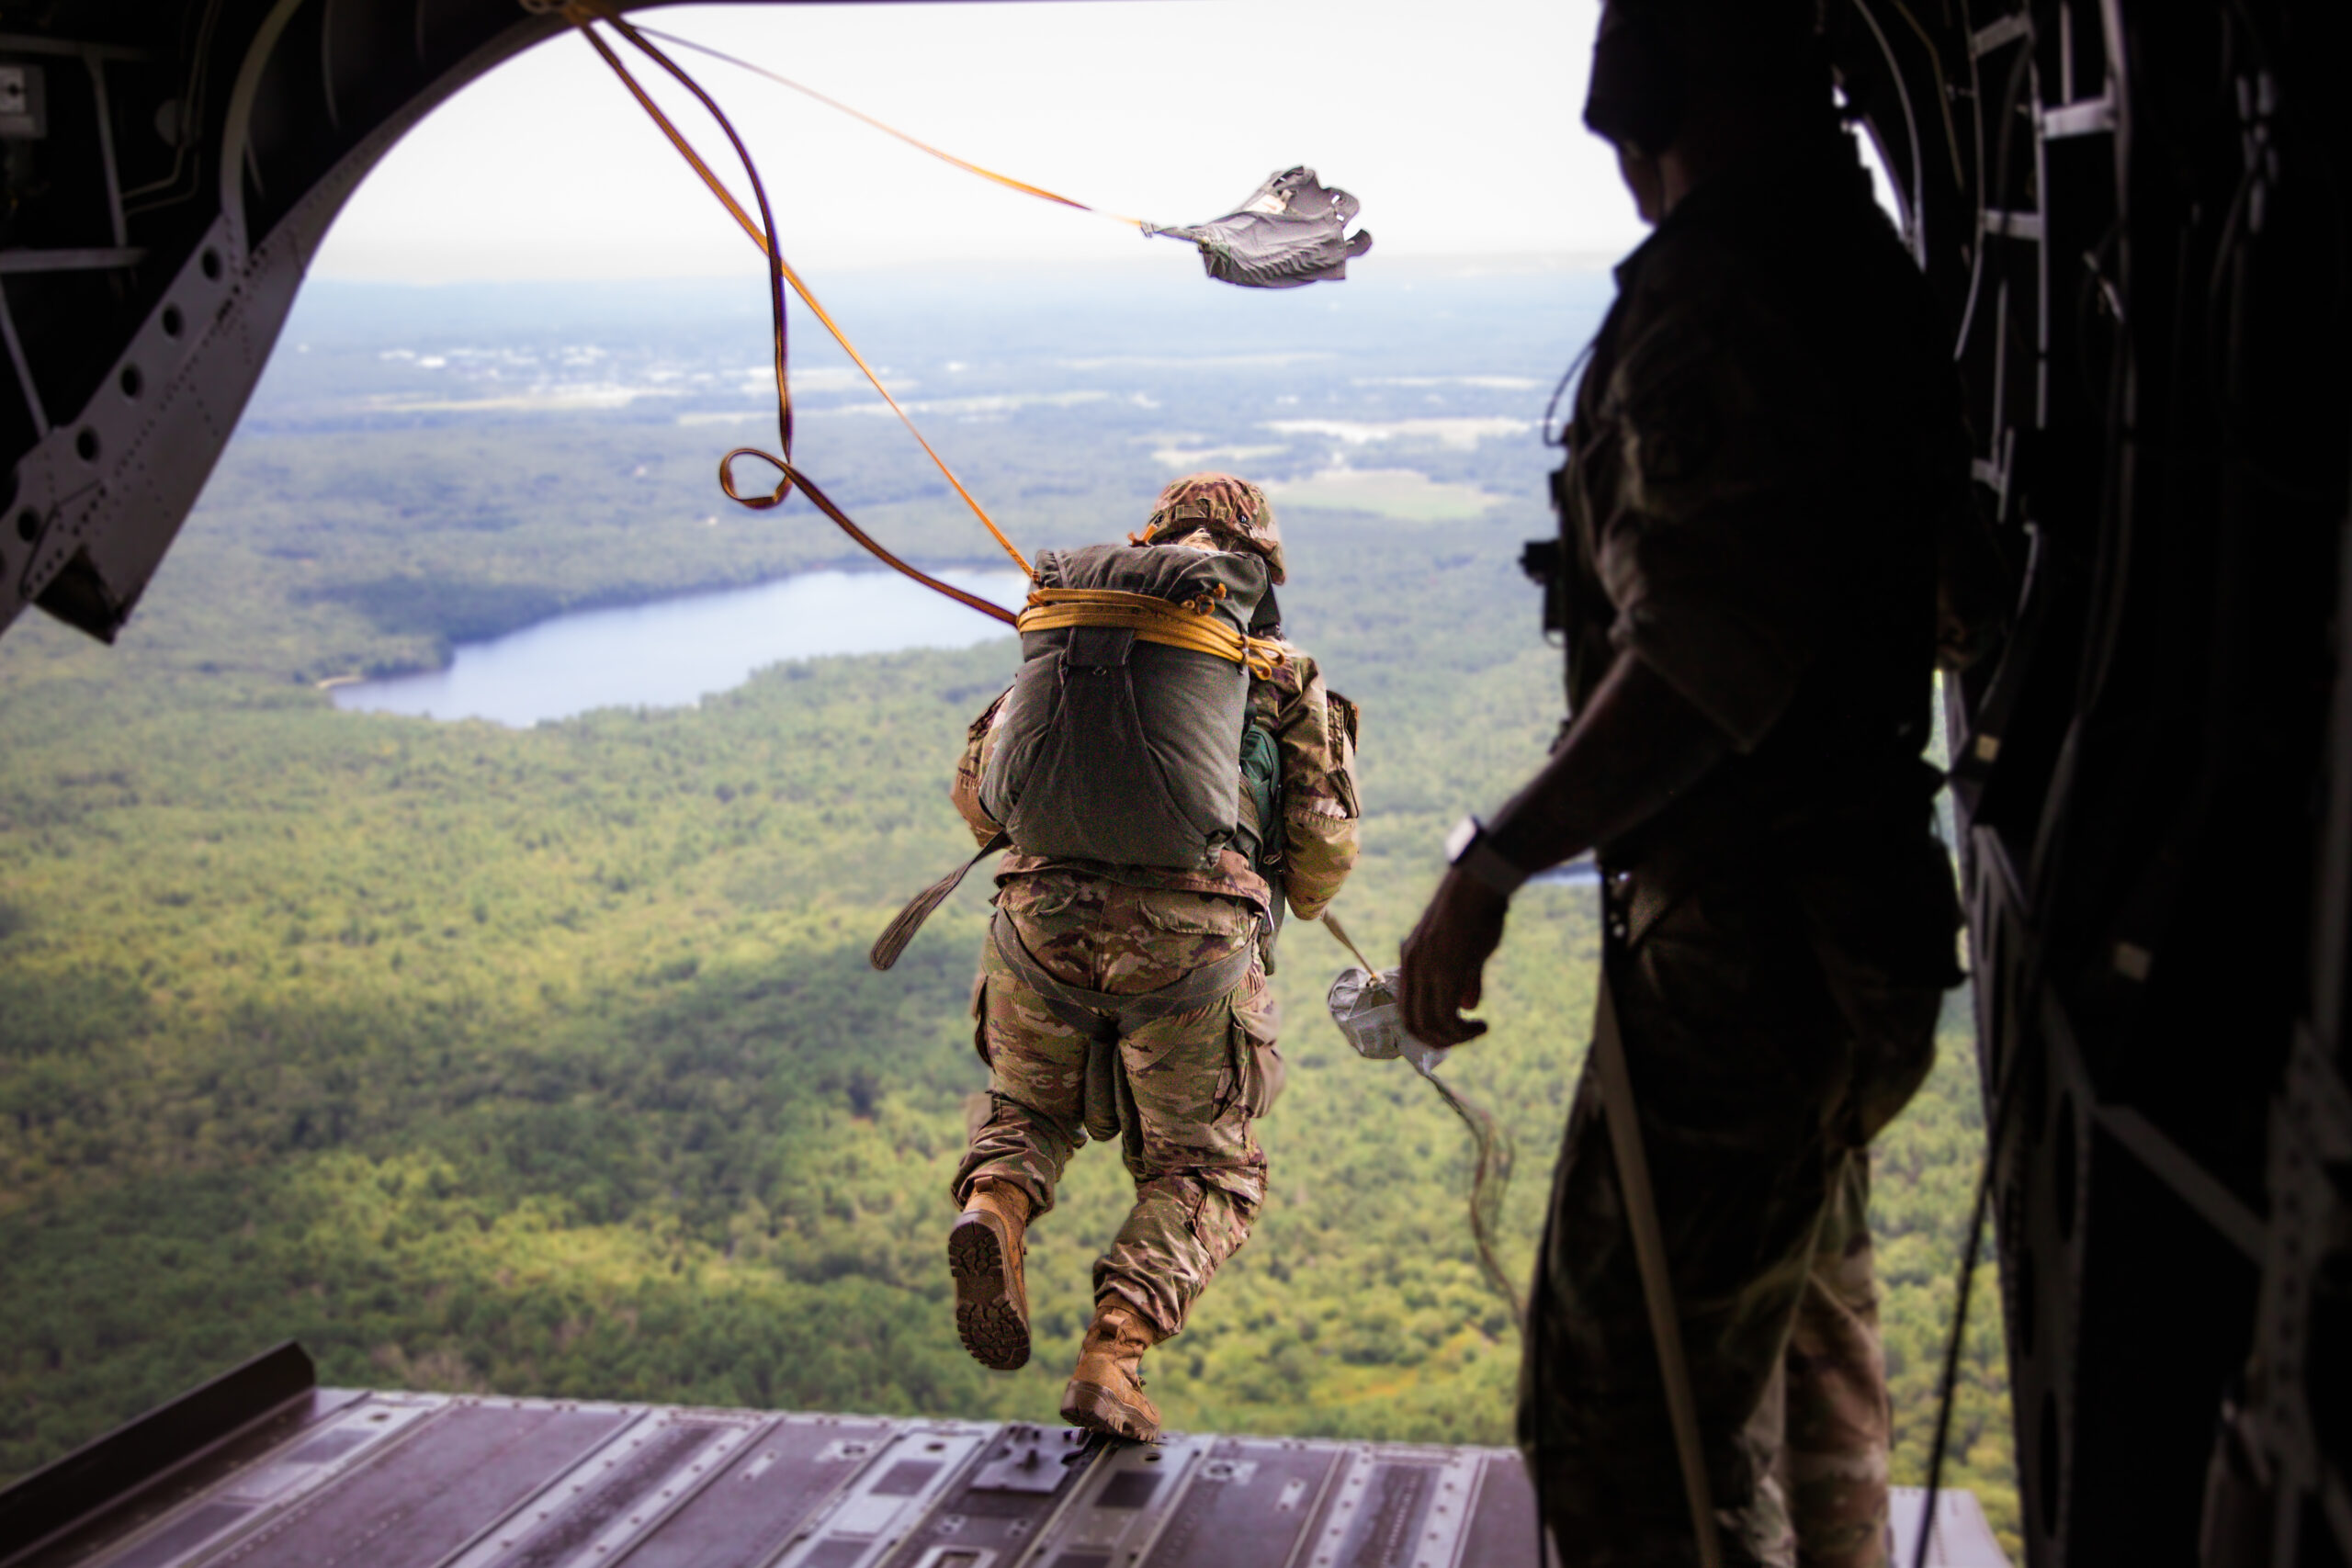 A group of US Army Paratroopers and International Paratroopers descend